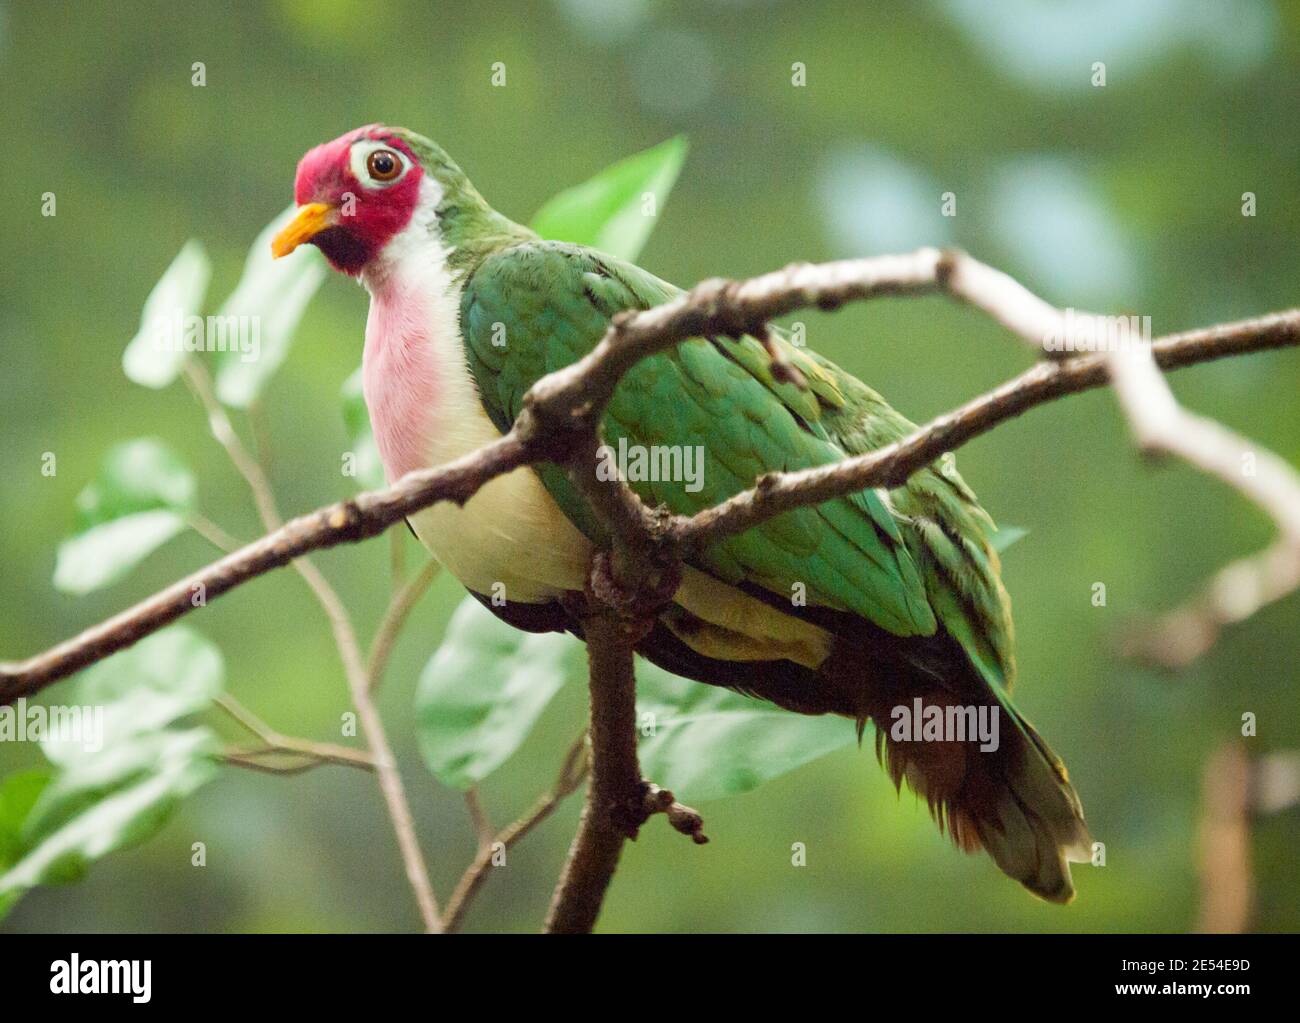 A male jambu fruit dove (Ptilinopus jambu) perched on a tree branch at the McCormick Bird House at Lincoln Park Zoo in Chicago, Illinois. Stock Photo